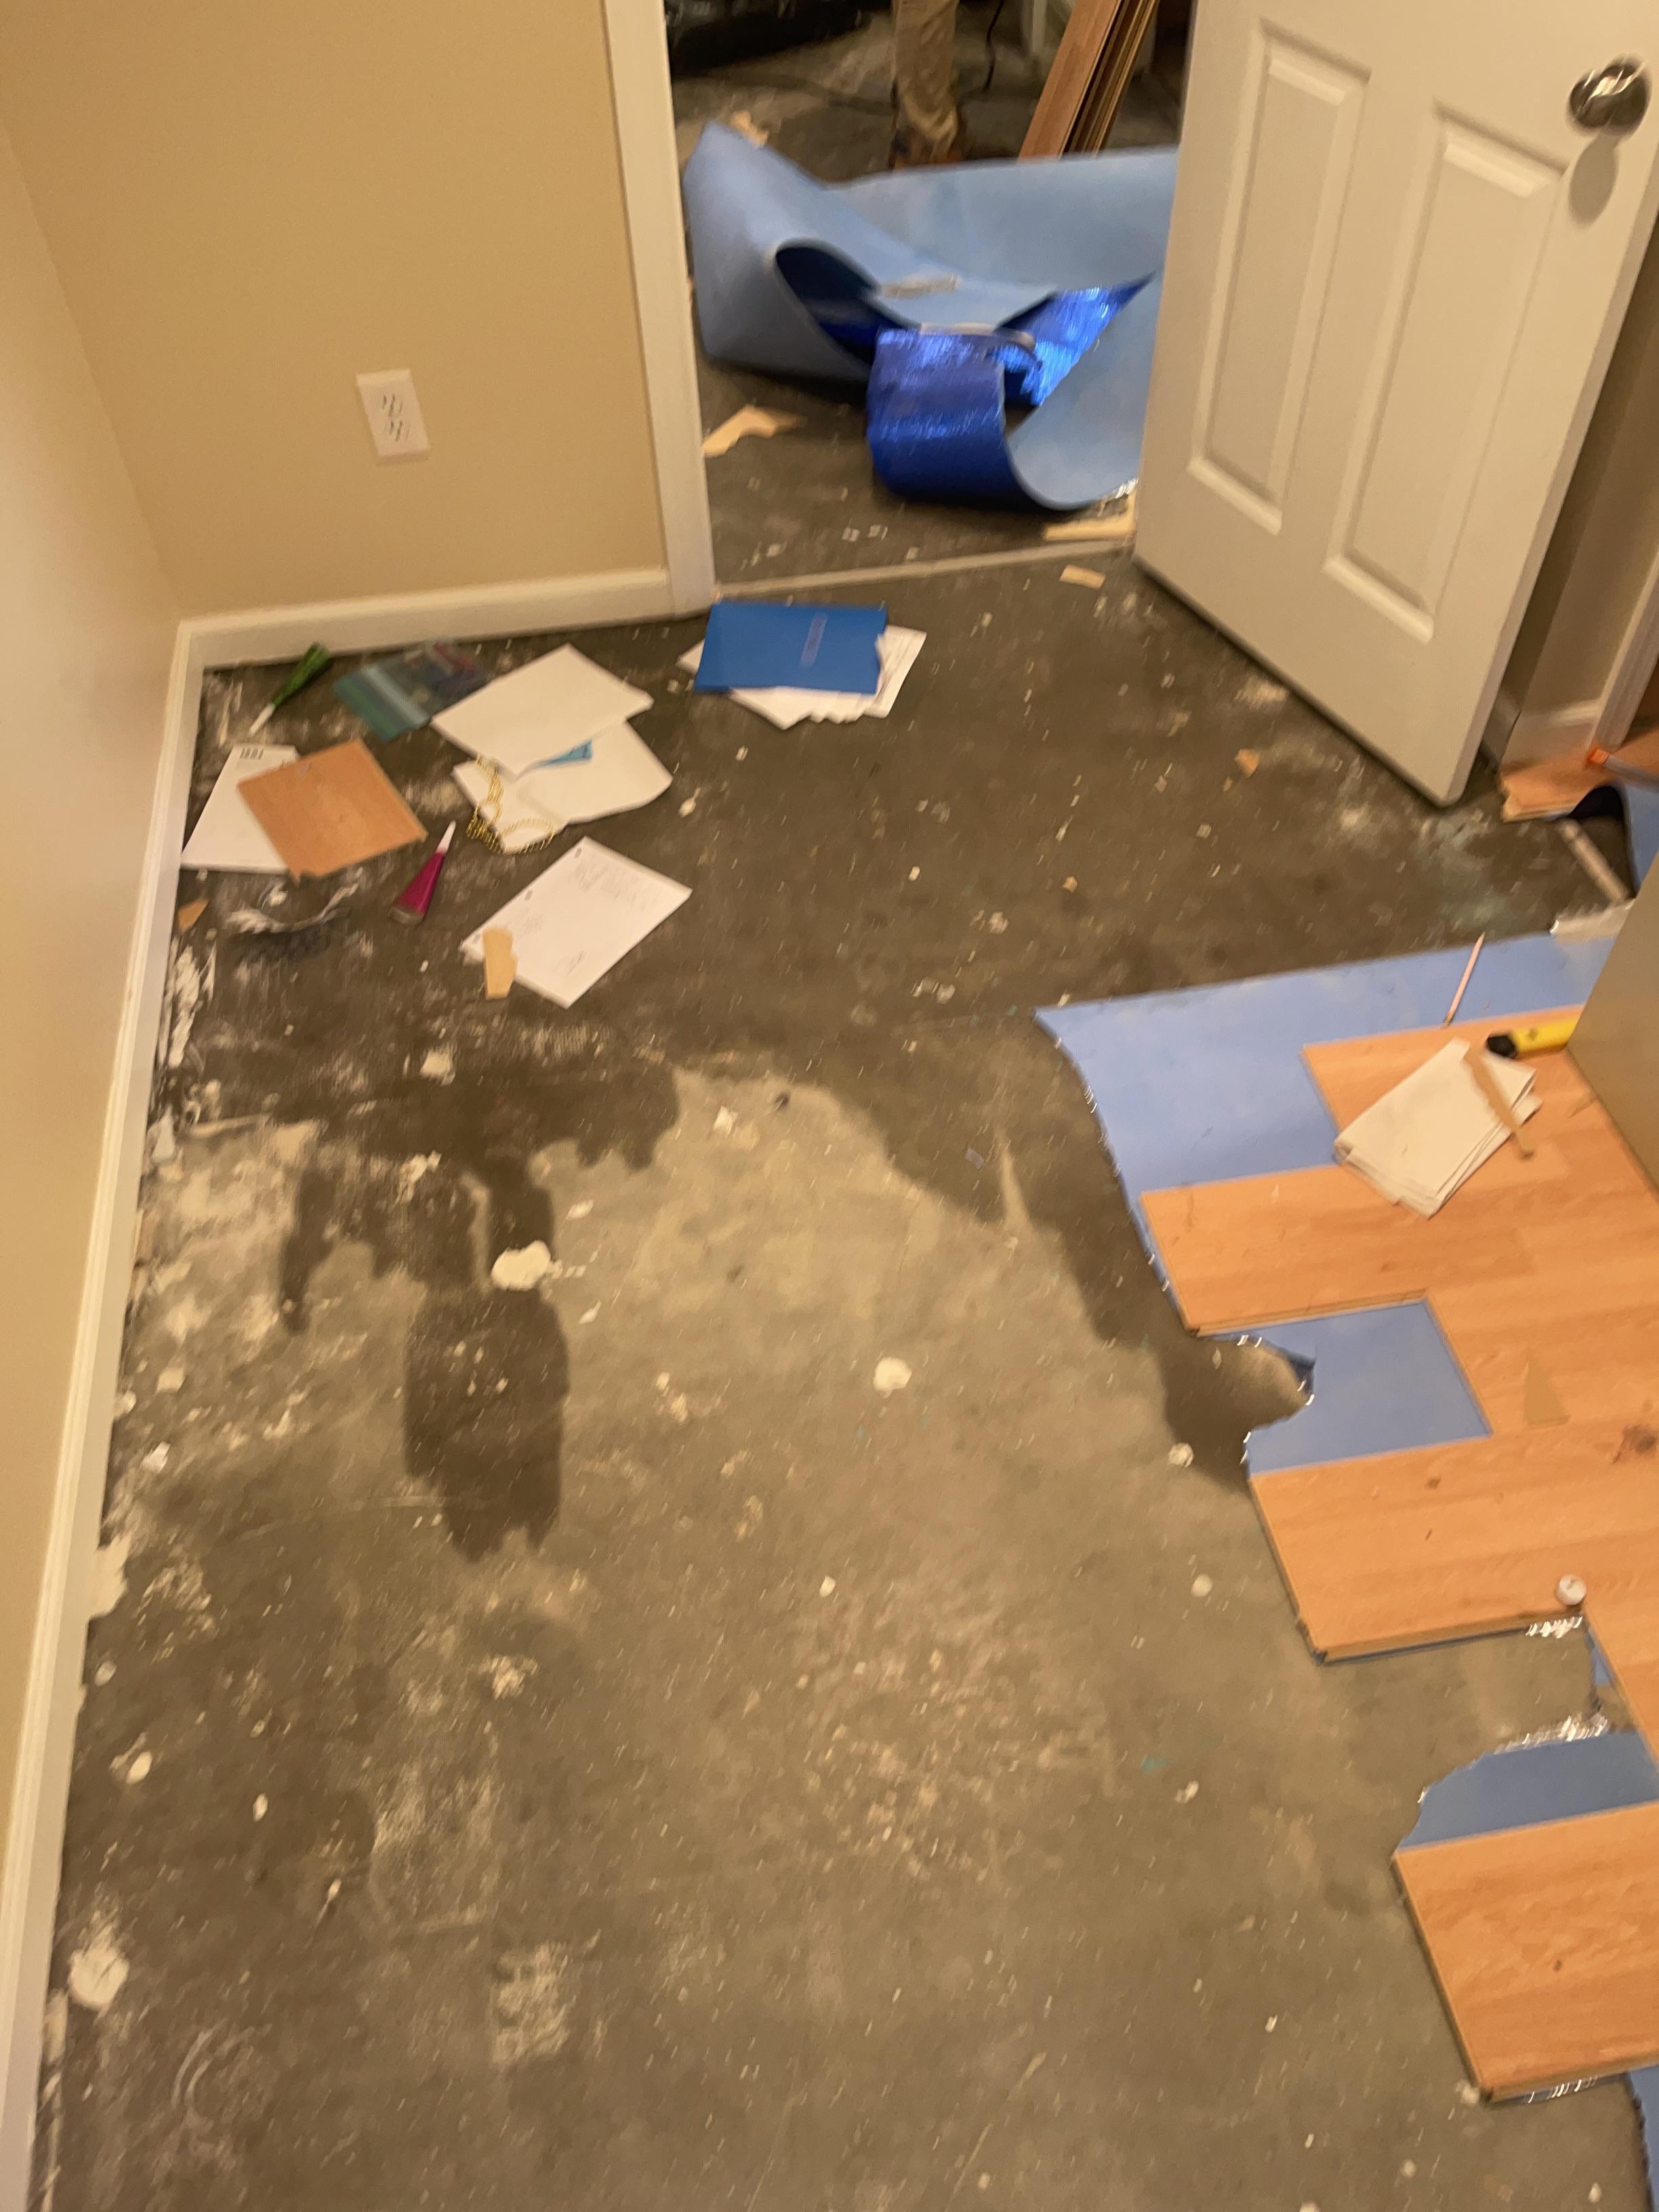 Exploding water heater successfully drenches basement in Chappaqua, NY